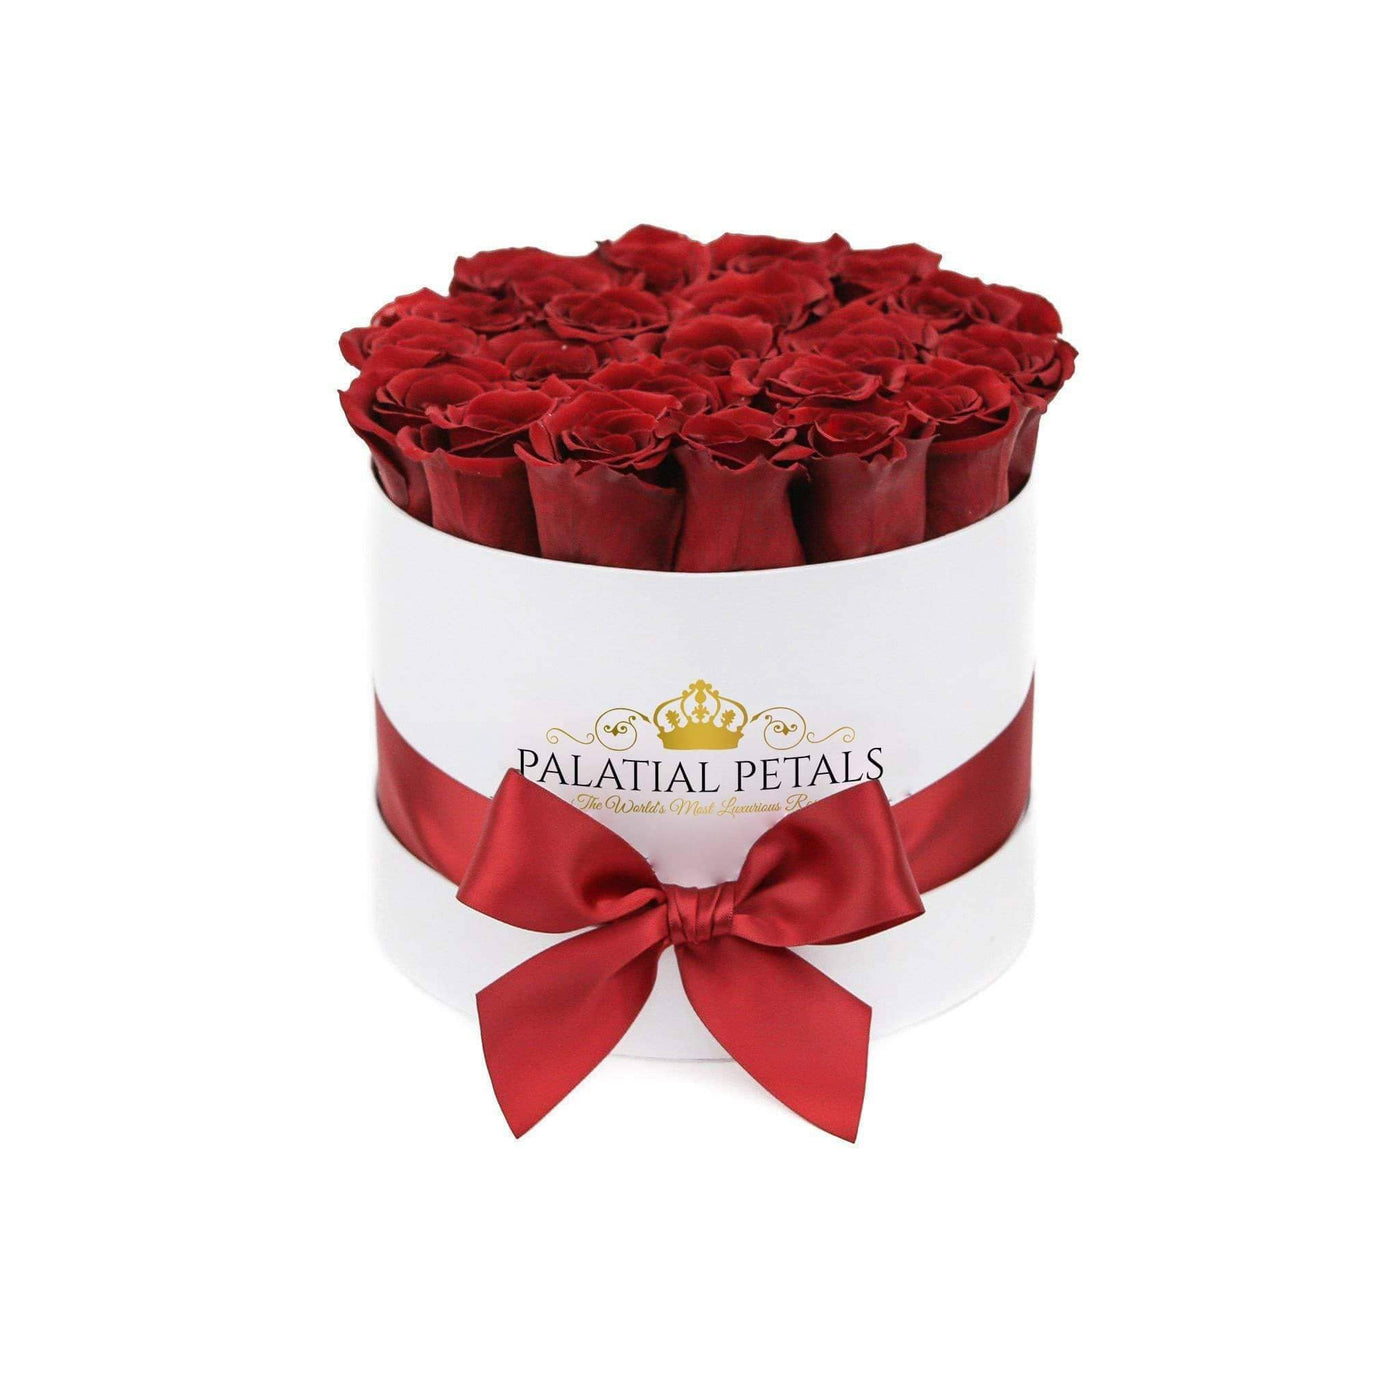 Louboutin Red Roses That Last A Year - Classic Rose Box